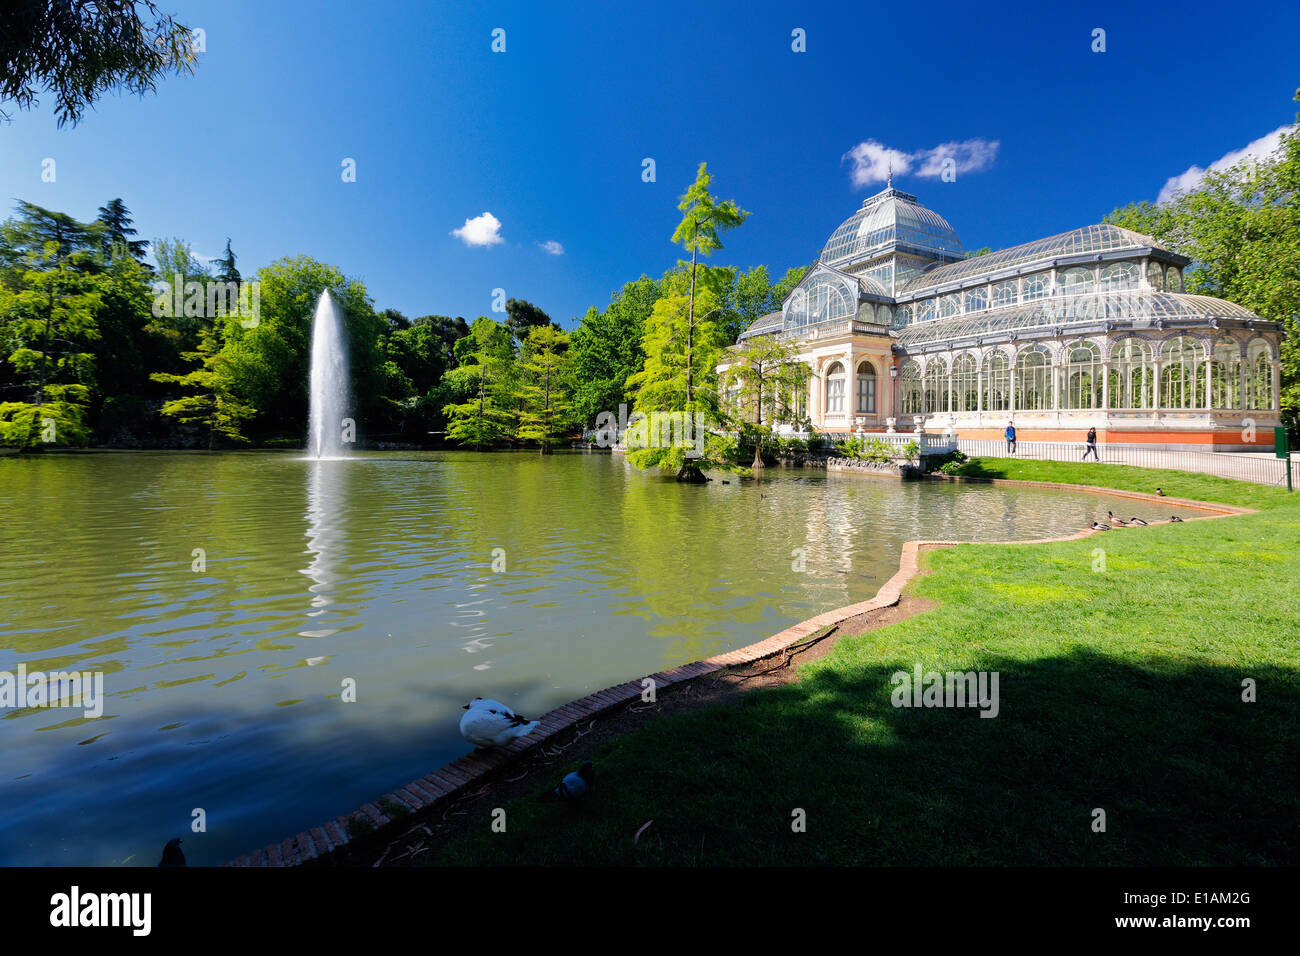 View of the Crystal Palace in the Buen Retiro Park, Madrid Spain Stock Photo